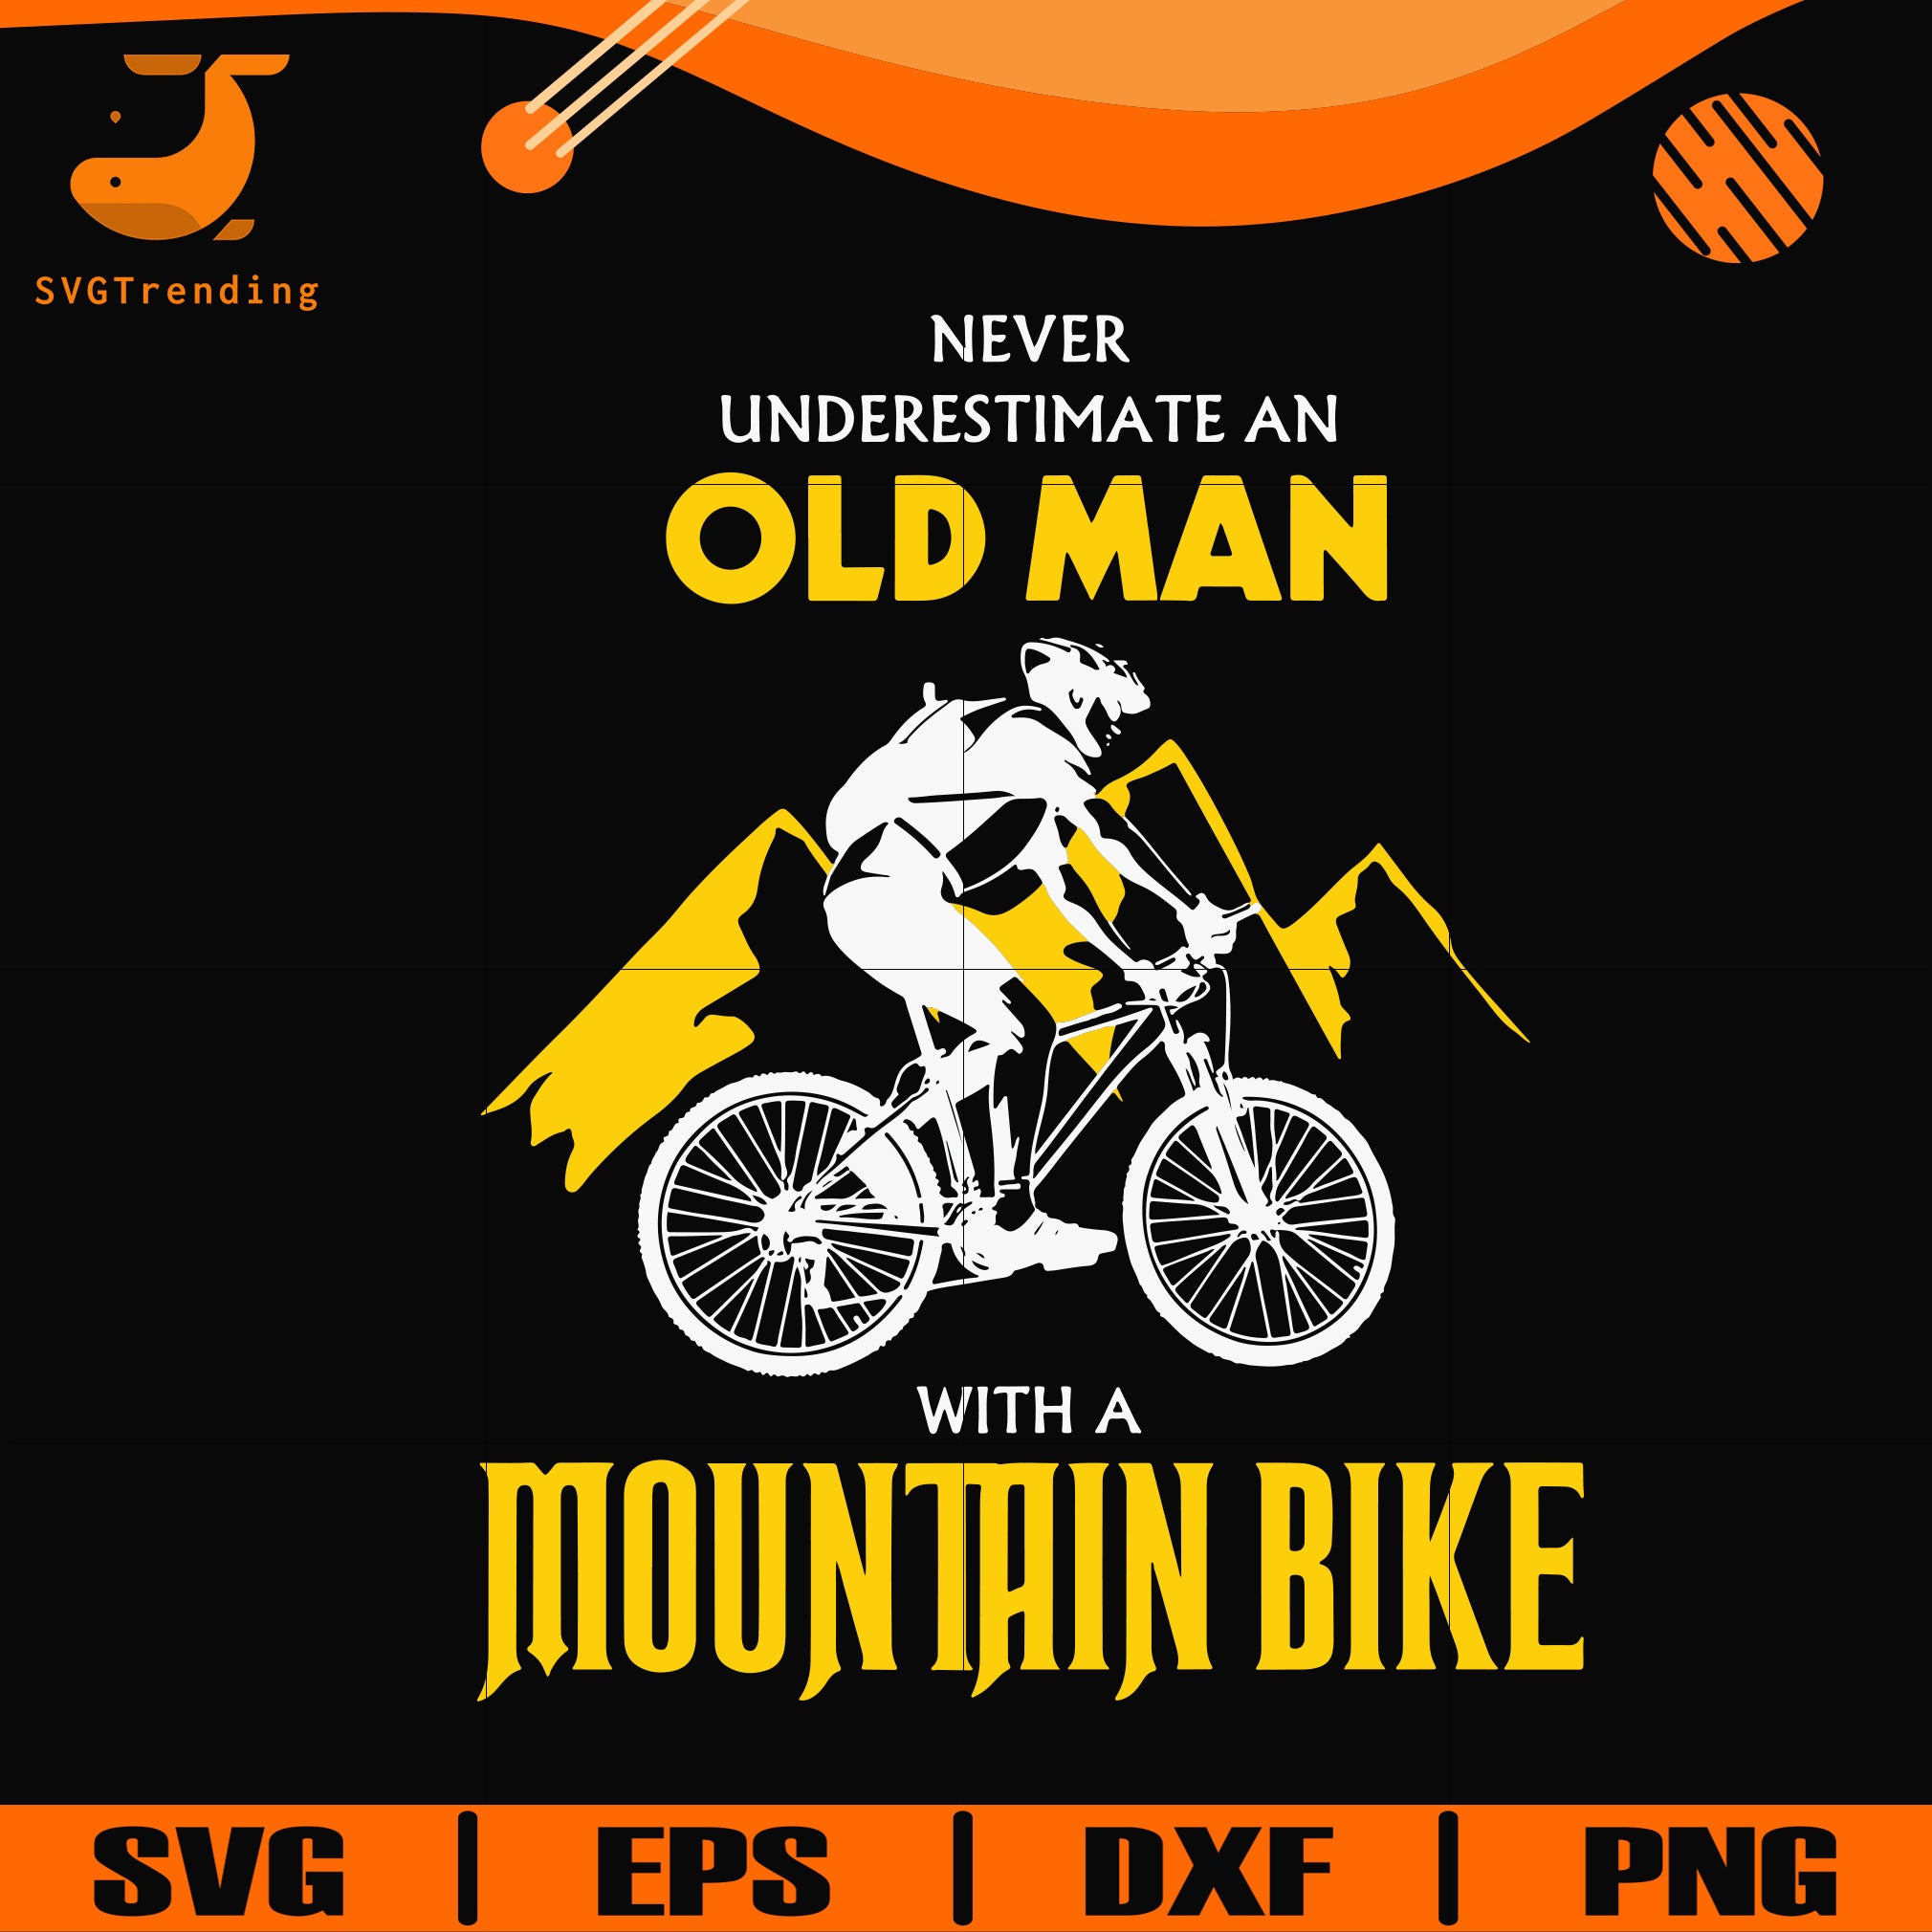 Download Old Guy Cycling Png Old People Cyclist Mountain Bike Svg Sublimate Cricut Silhouett Never Underestimate An Old Man On A Bicycle Bicycle Svg Clip Art Art Collectibles